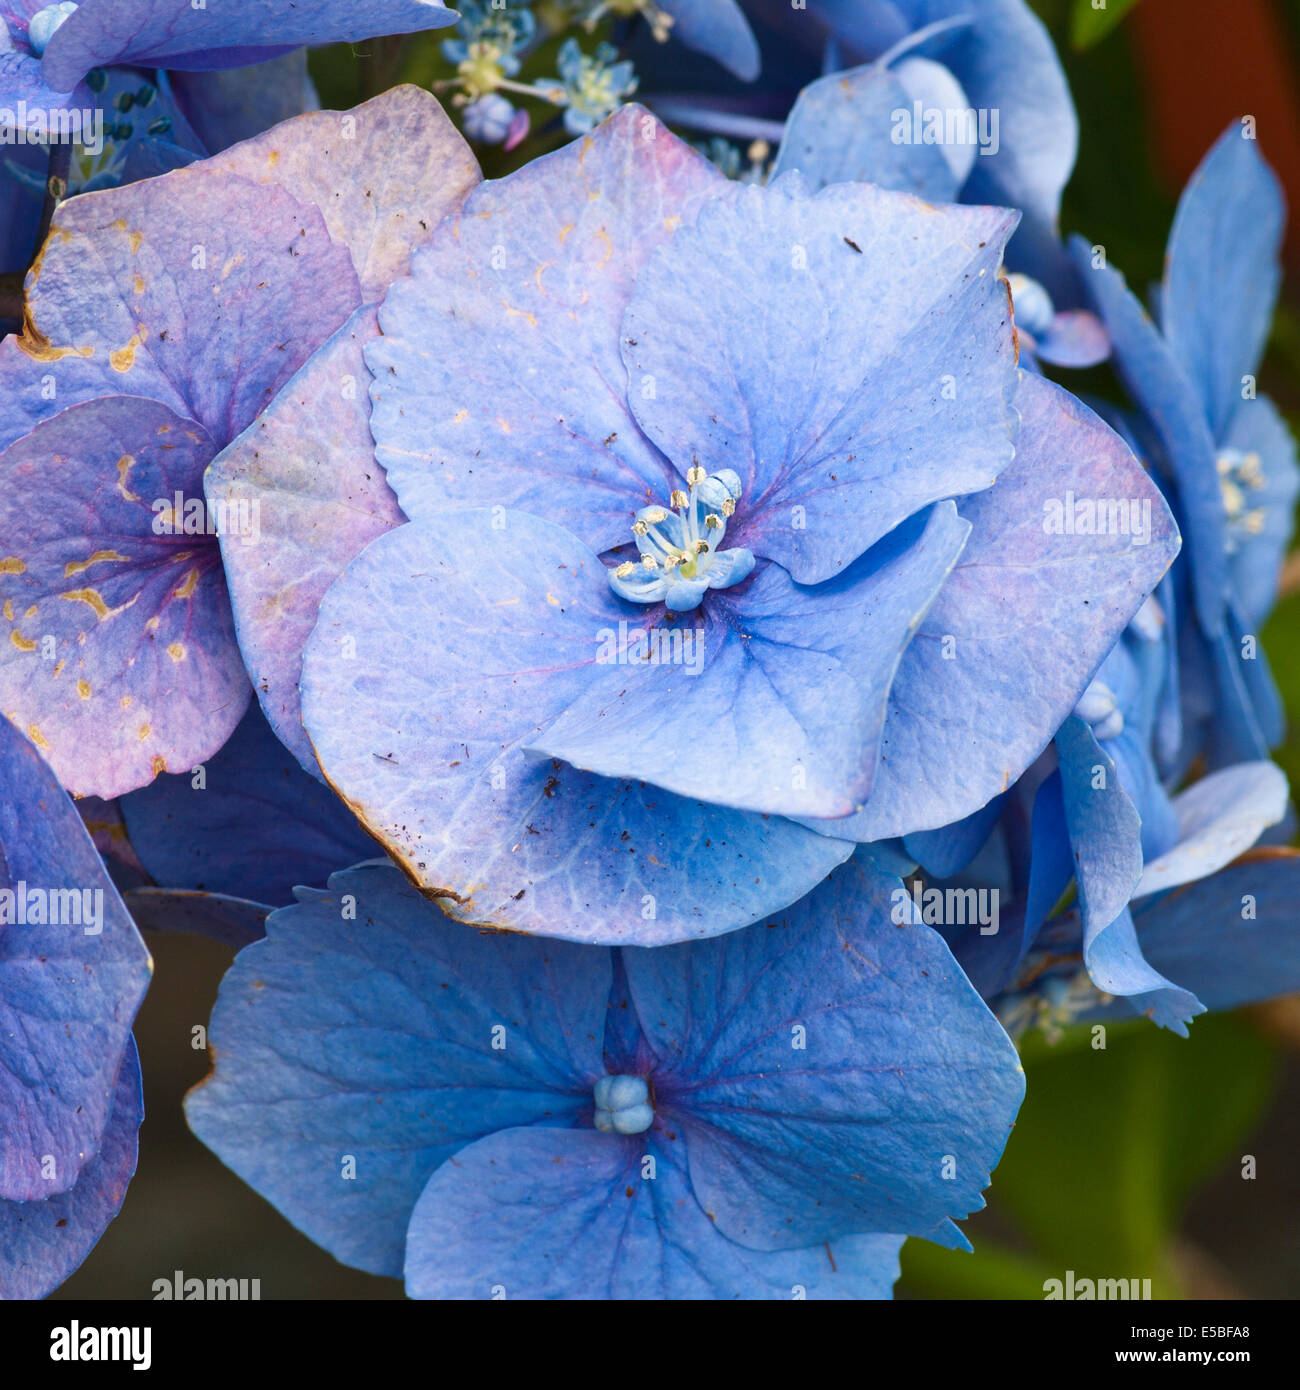 Blue Hydrangea macrophylla Commonly known as bigleaf hydrangea, French hydrangea, lacecap hydrangea, mophead hydrangea, Stock Photo